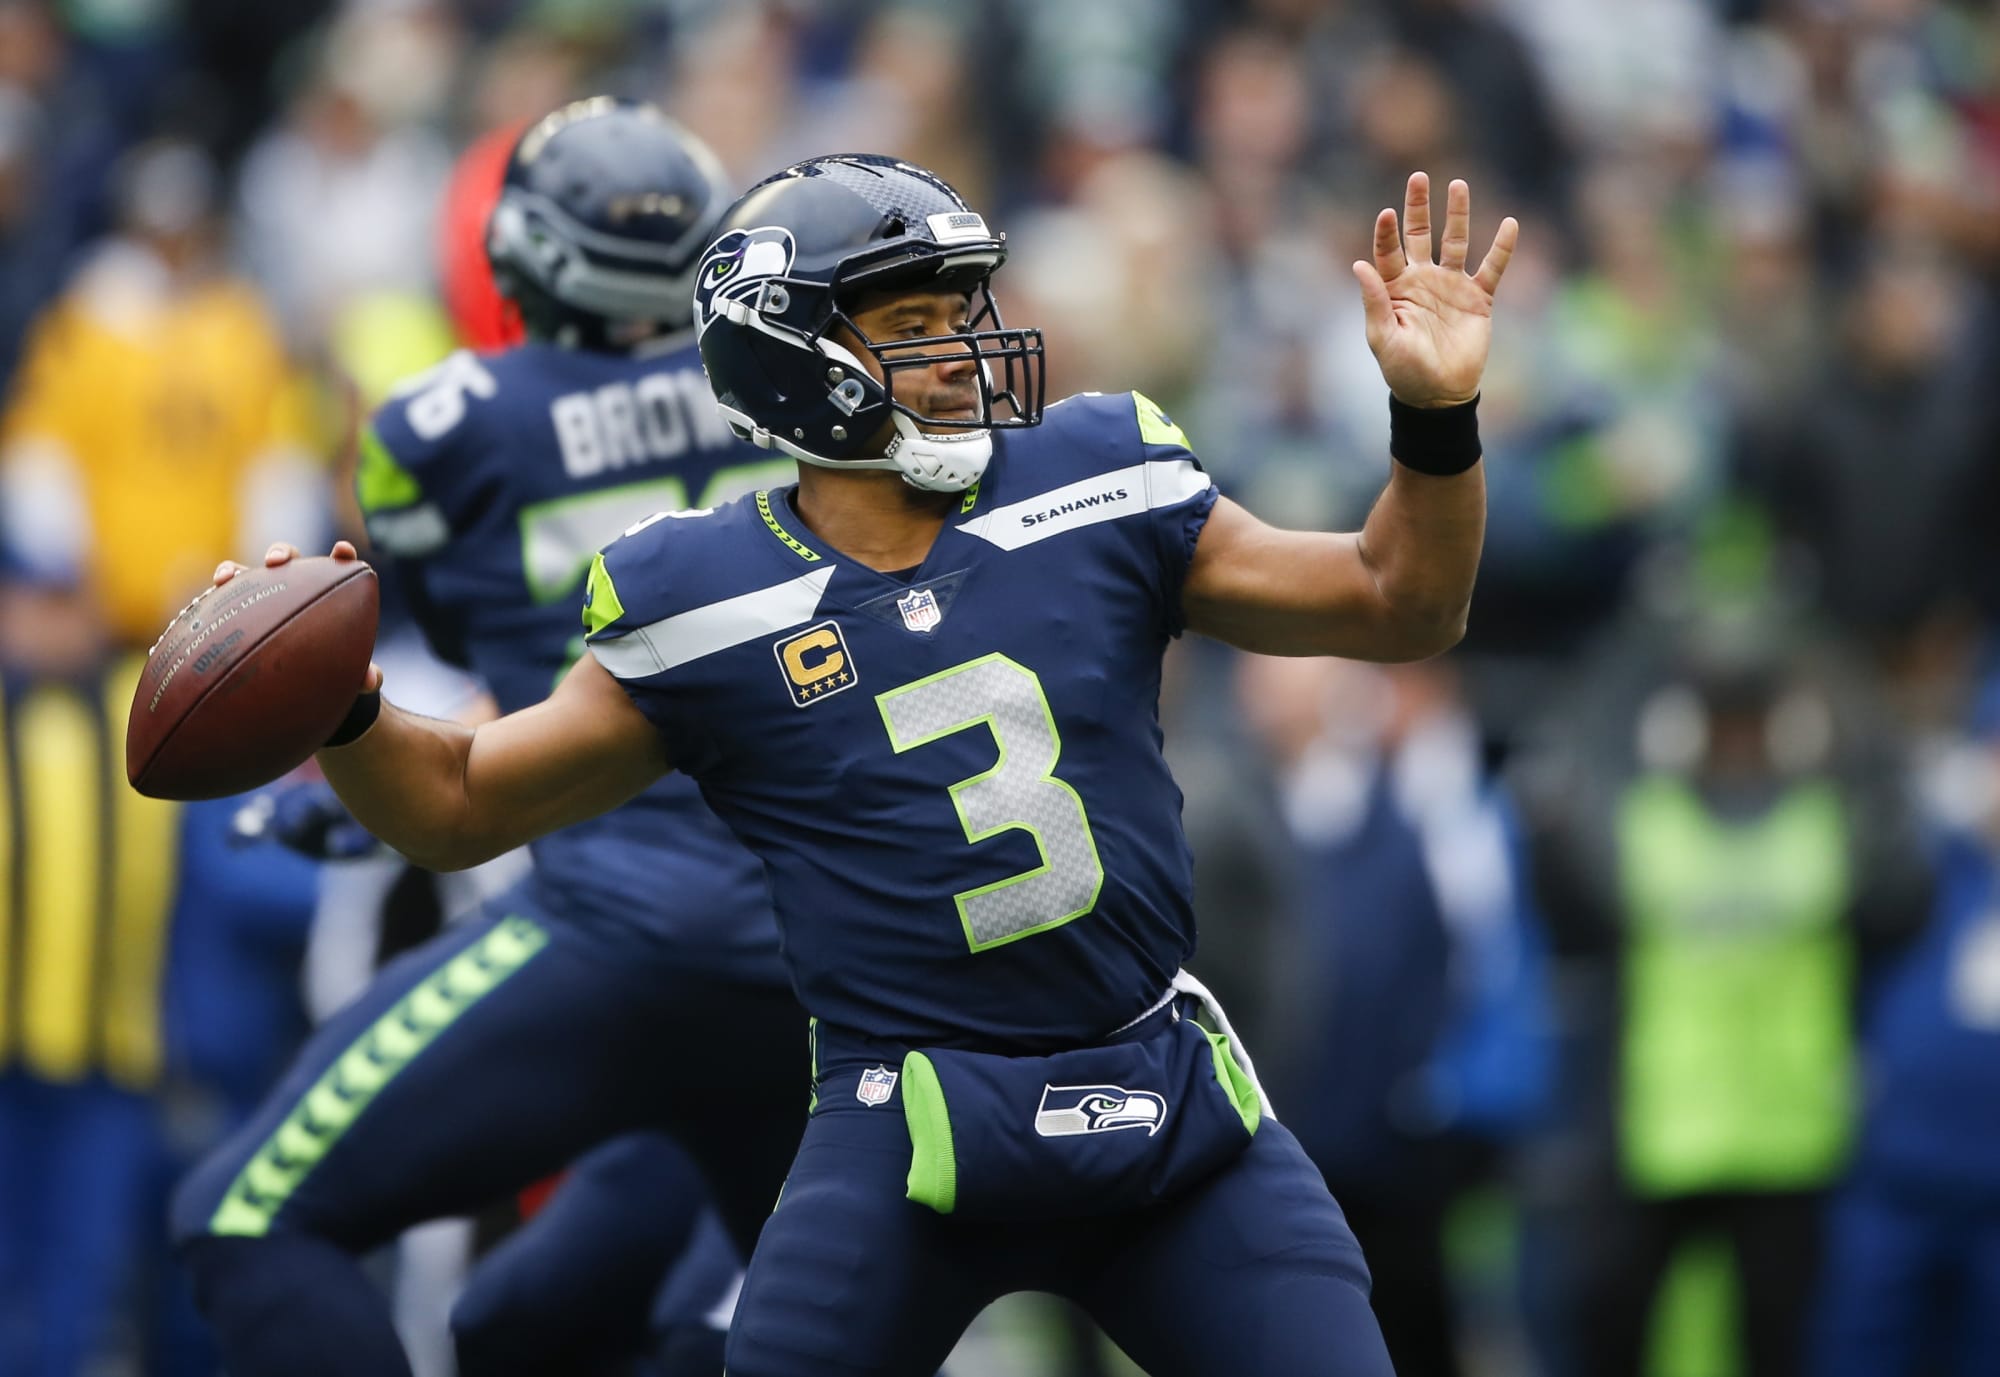 Seahawks better sign Russell Wilson to that extension soon